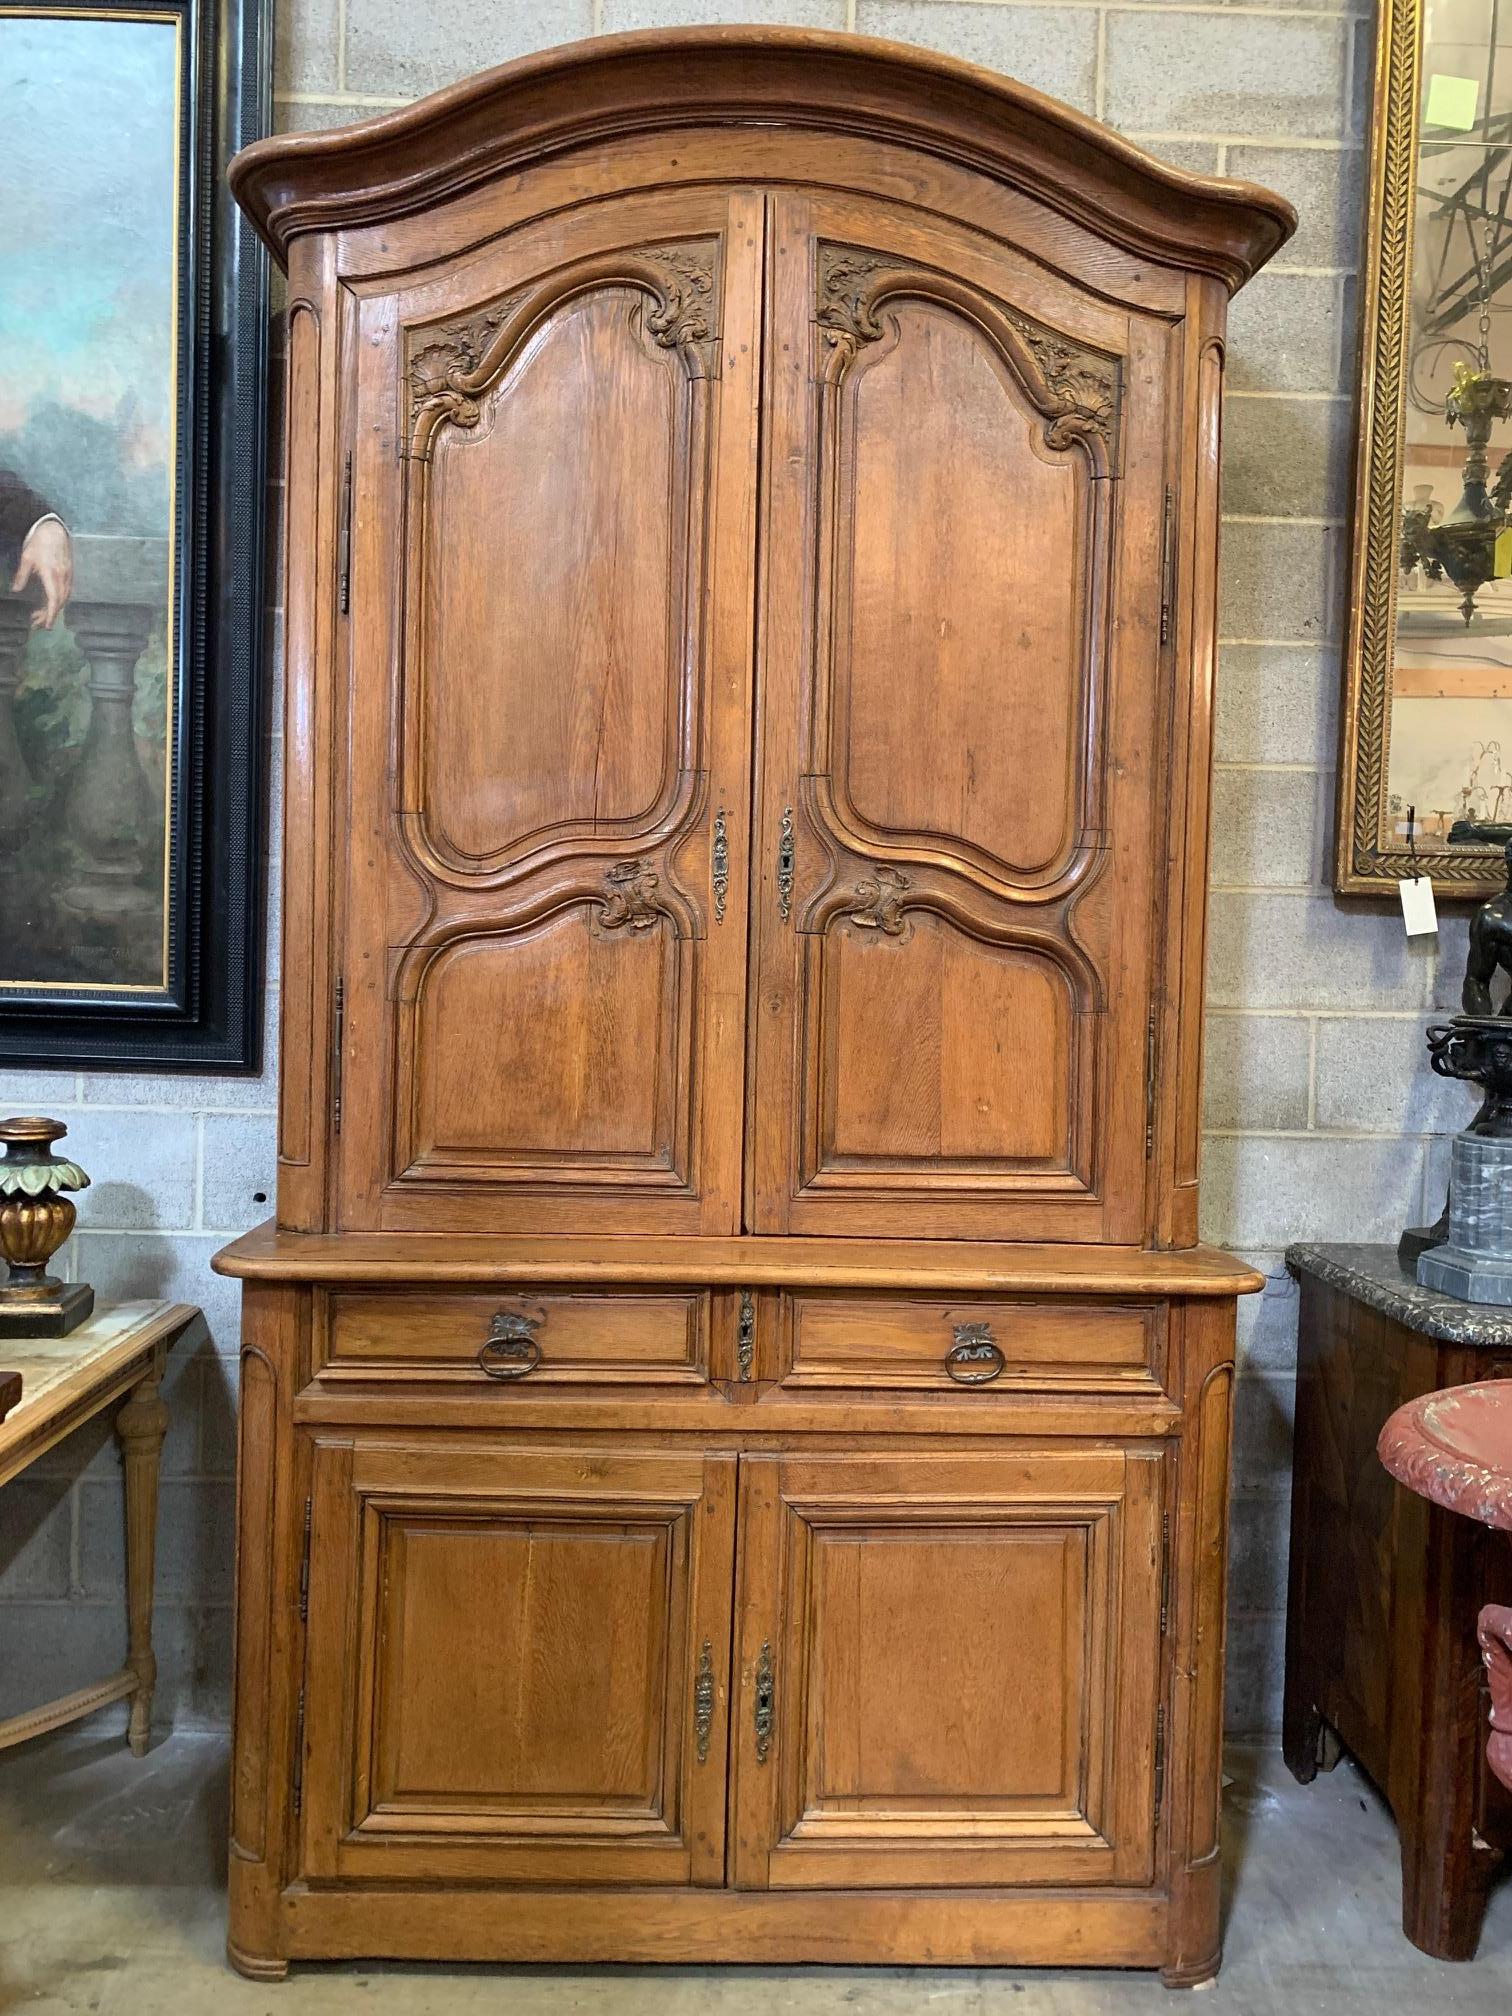 French Louis XV carved oak buffett a du corps from the 18th century. This two part cabinet is beautifully carved and has been lightened at an earlier time giving it a wonderful pale golden finish. The drawers have also been modified to create a